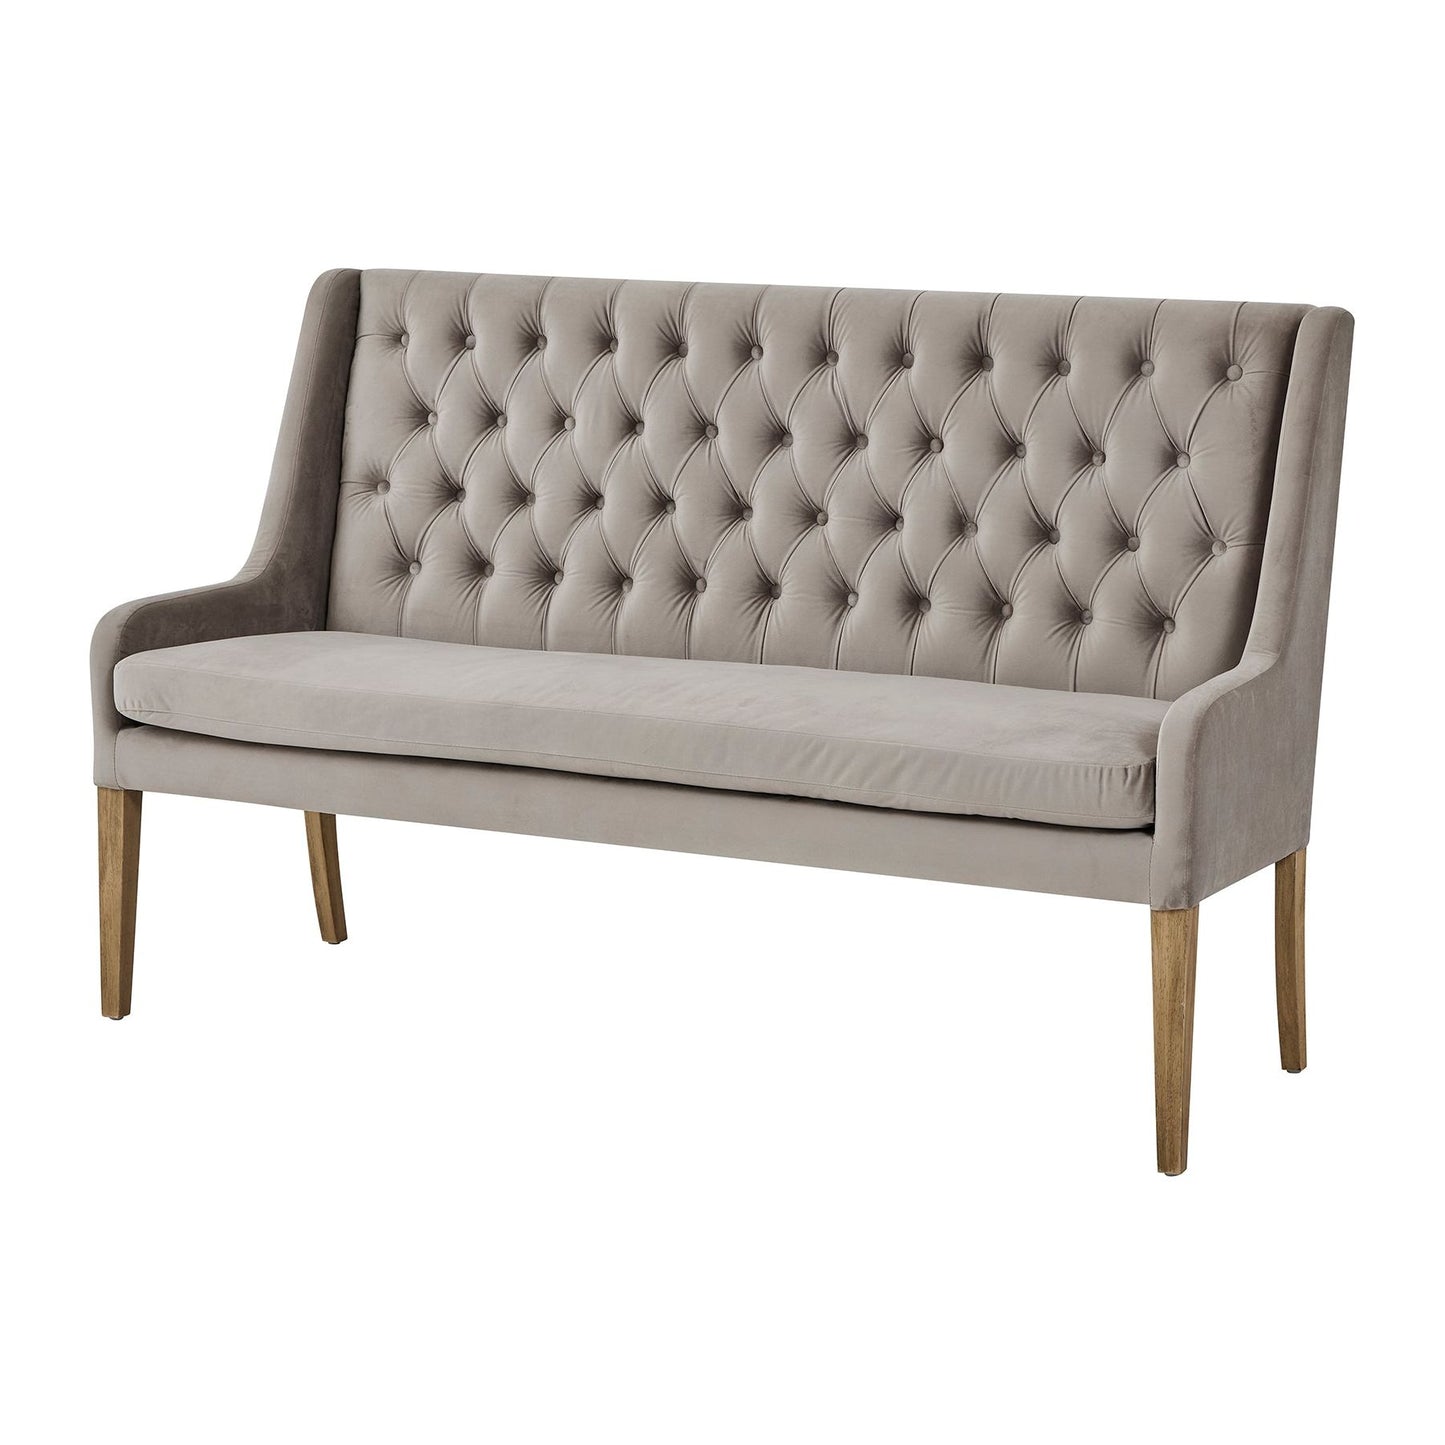 Henley Luxury Large Button Pressed Dining Bench - Ashton and Finch